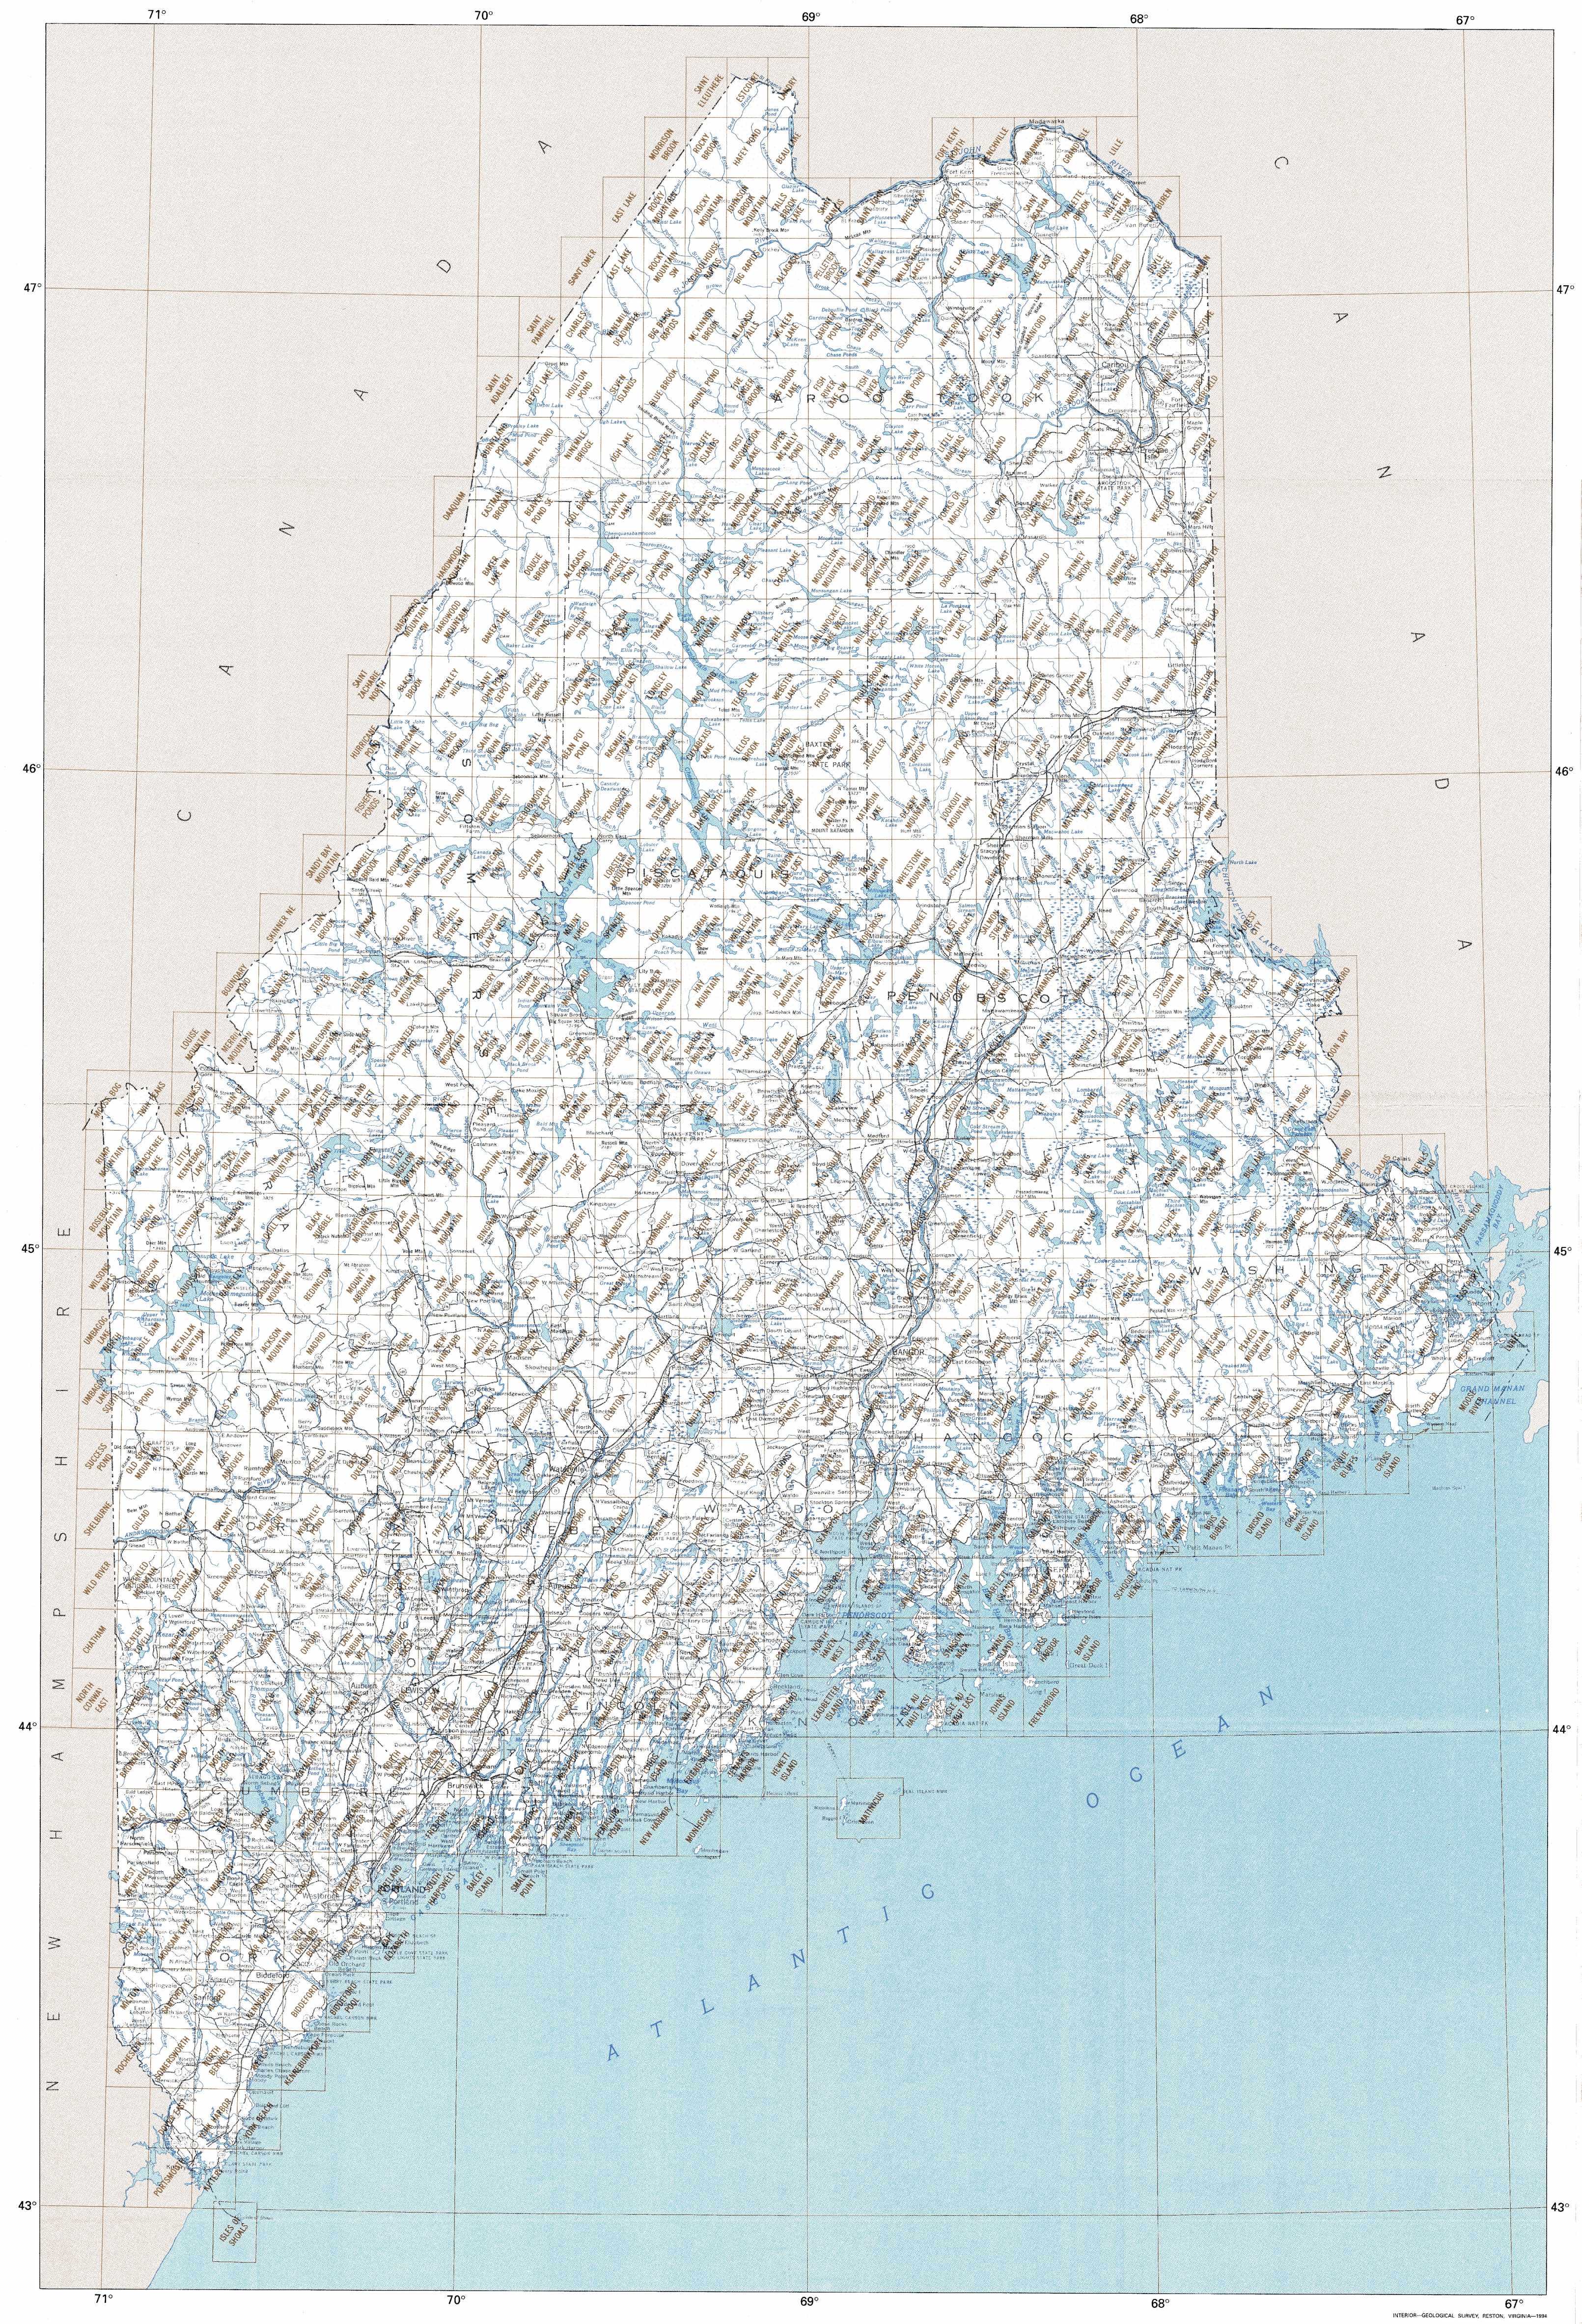 1:24000 Scale 7.5 X 7.5 Minute 2000 26.5 x 20.8 in YellowMaps Vinalhaven ME topo map Historical Updated 2001